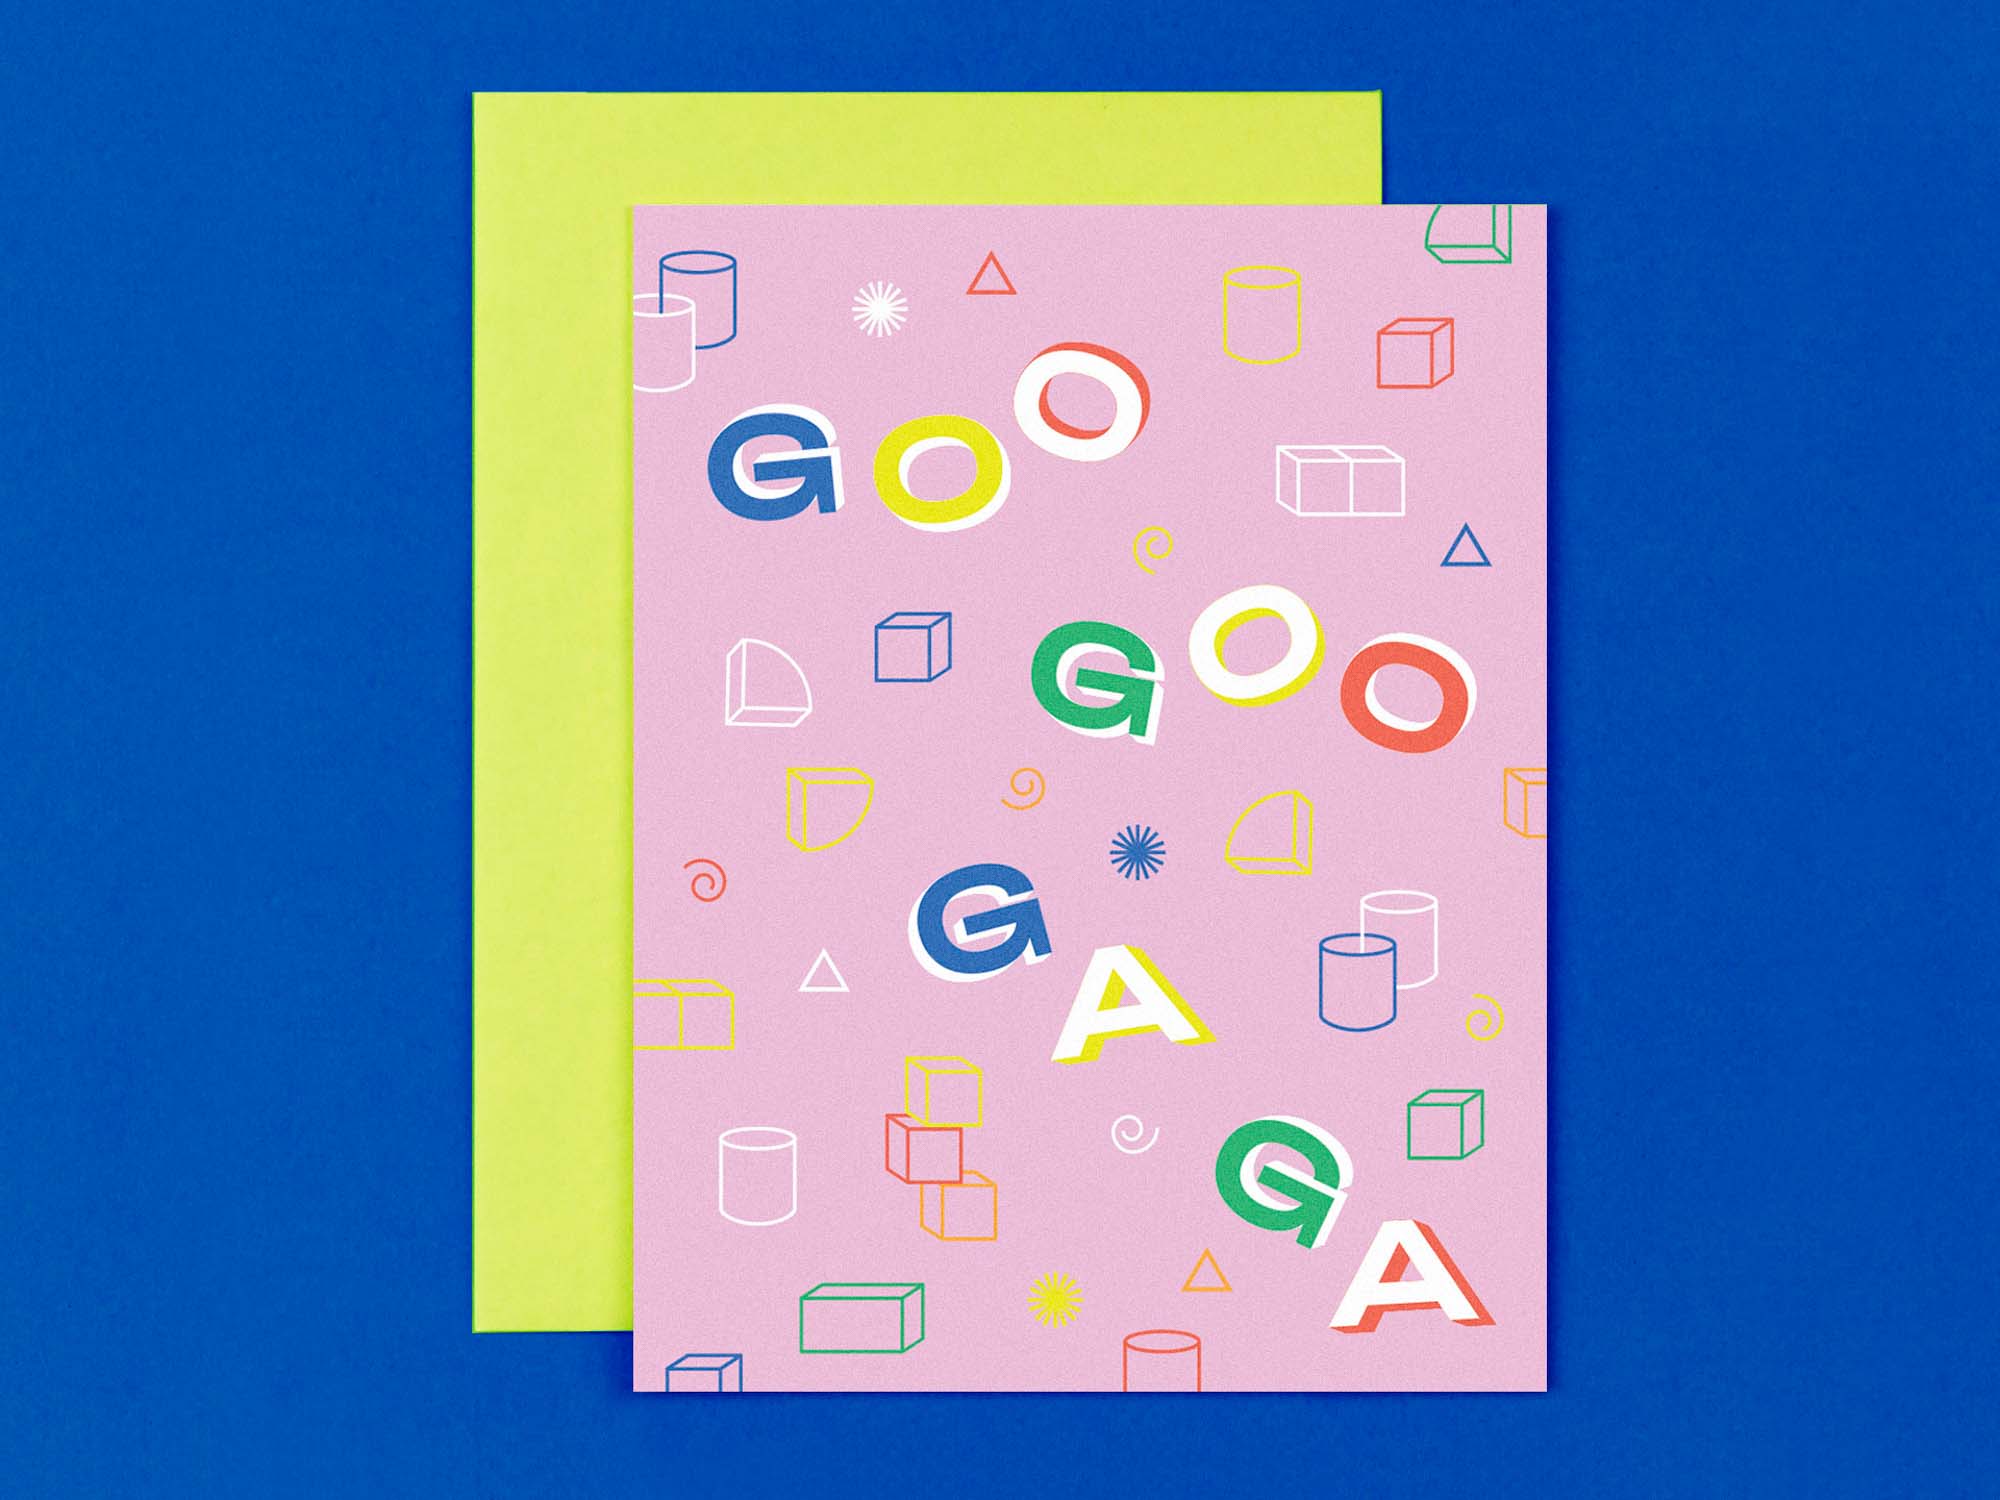 Goo Goo Ga Ga playful typographic gender neutral baby card with abstract blocks and shapes. Made in USA by @mydarlin_bk